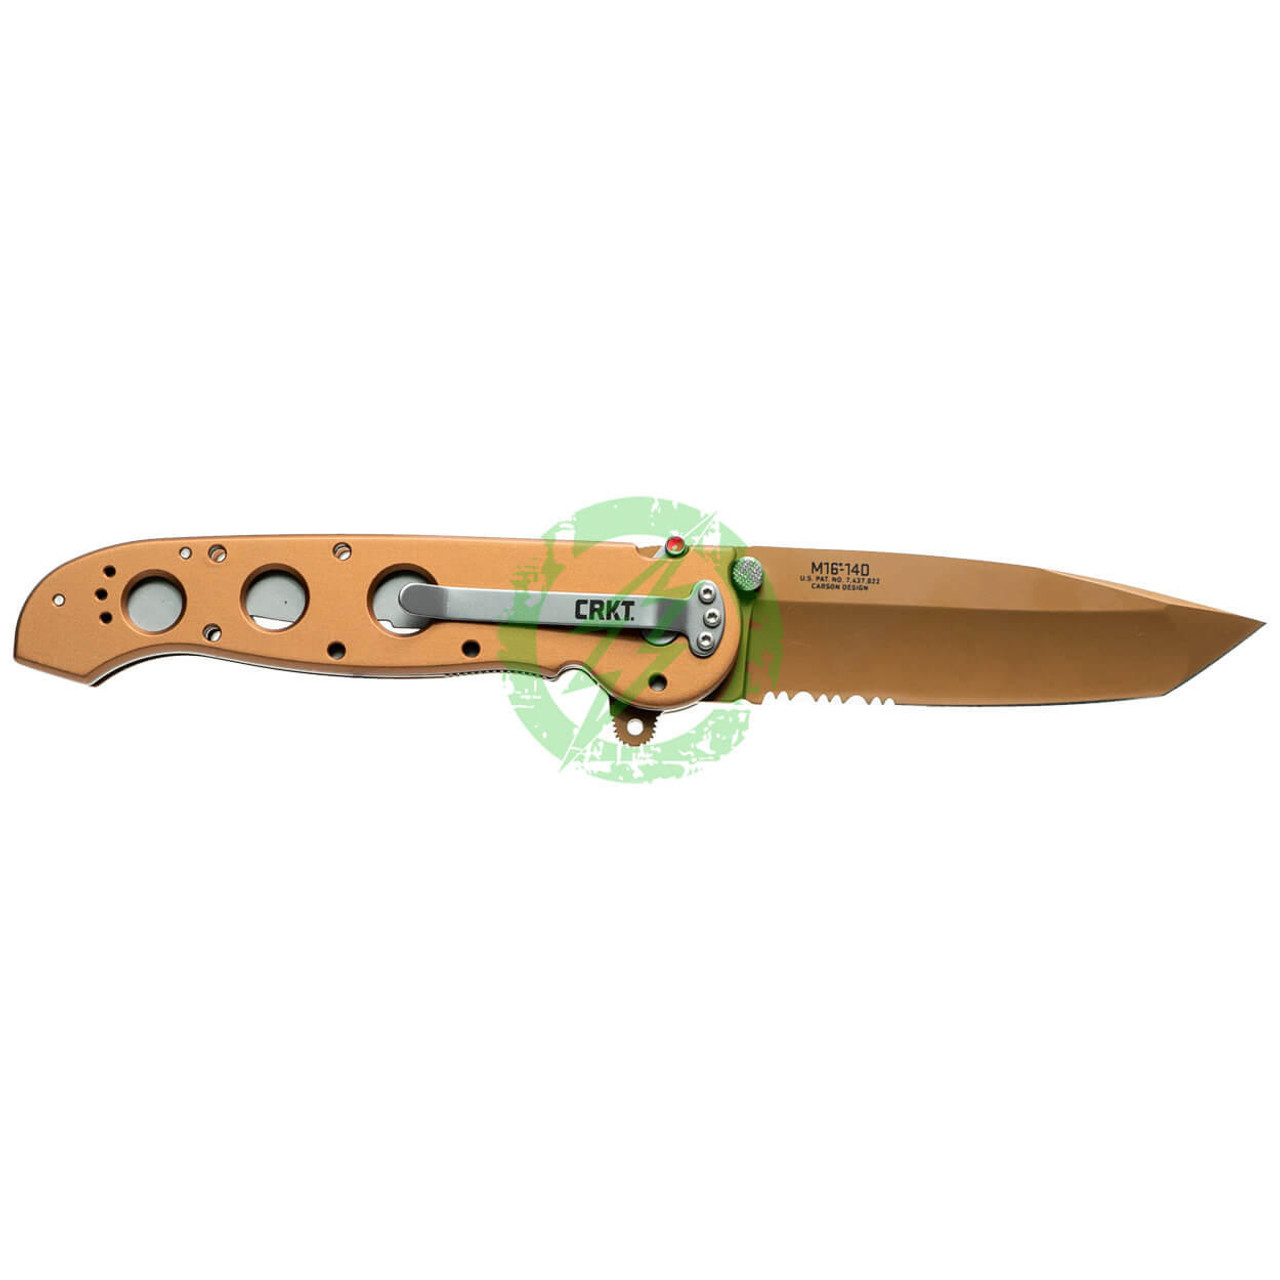 CRKT (Columbia River Knife Tool) CRKT M16-14D Copper with Triple Point Serrations Folding Knife with AUS 8 Titanium Nitride Blade & Aluminum Handle 